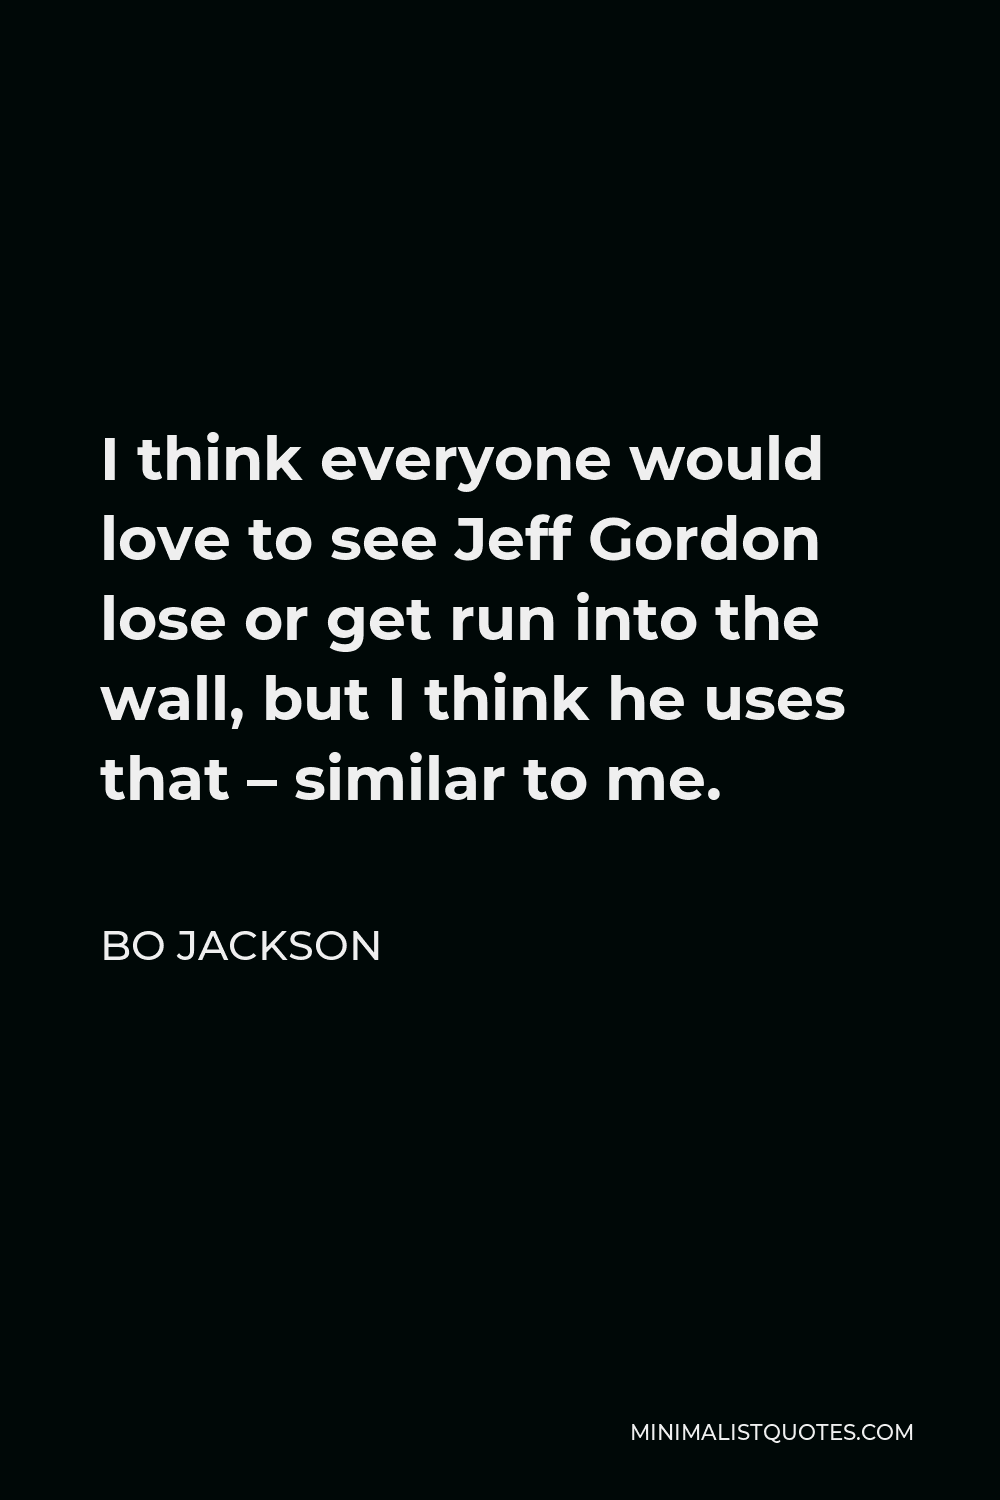 Bo Jackson Quote - I think everyone would love to see Jeff Gordon lose or get run into the wall, but I think he uses that – similar to me.